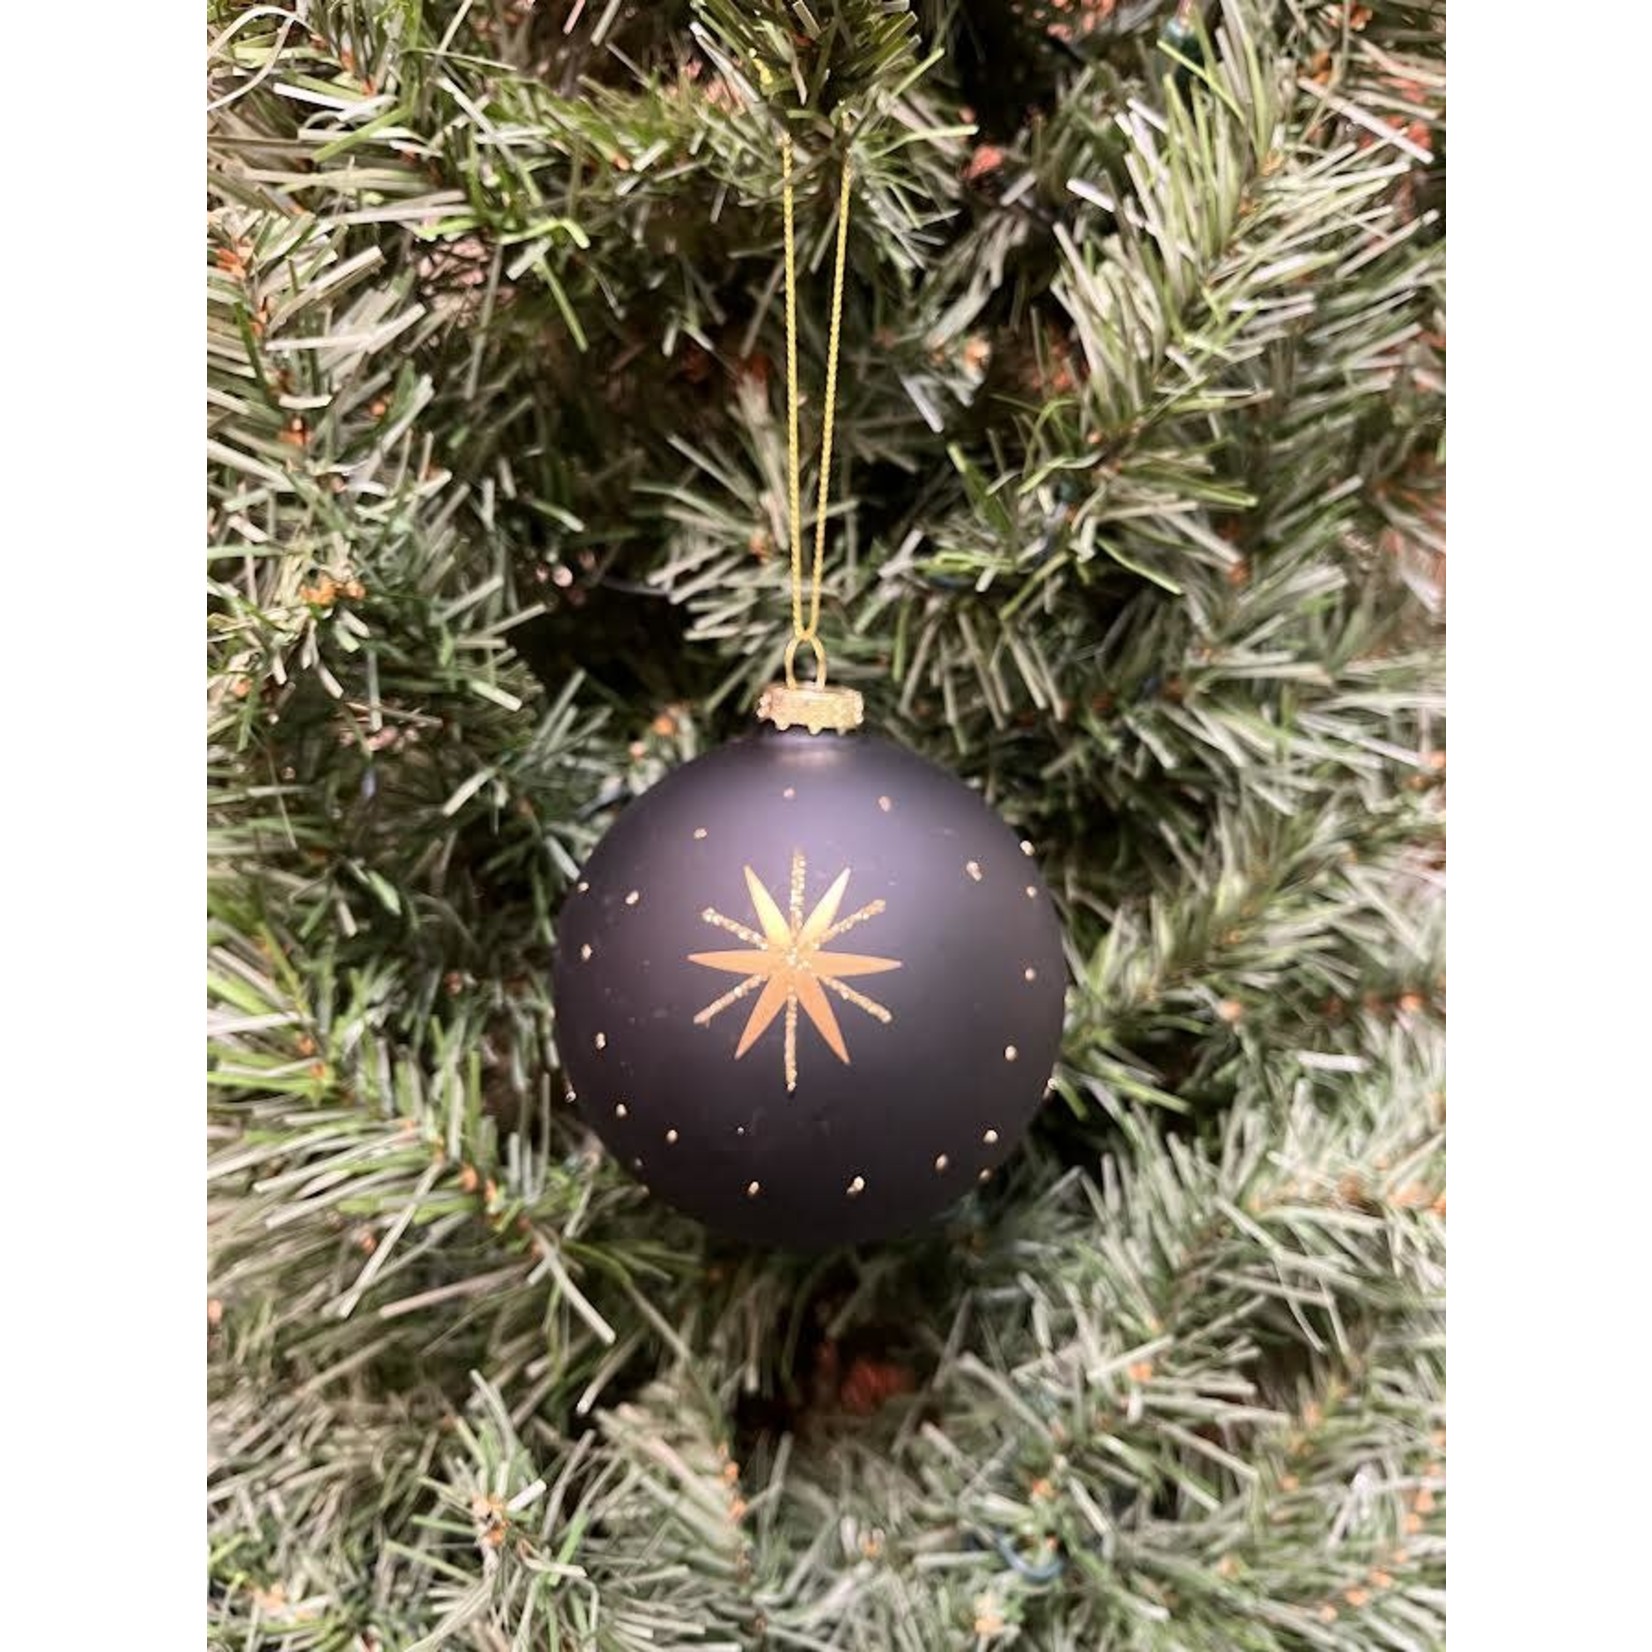 Zodax Gold and Black Star Ornament 4"